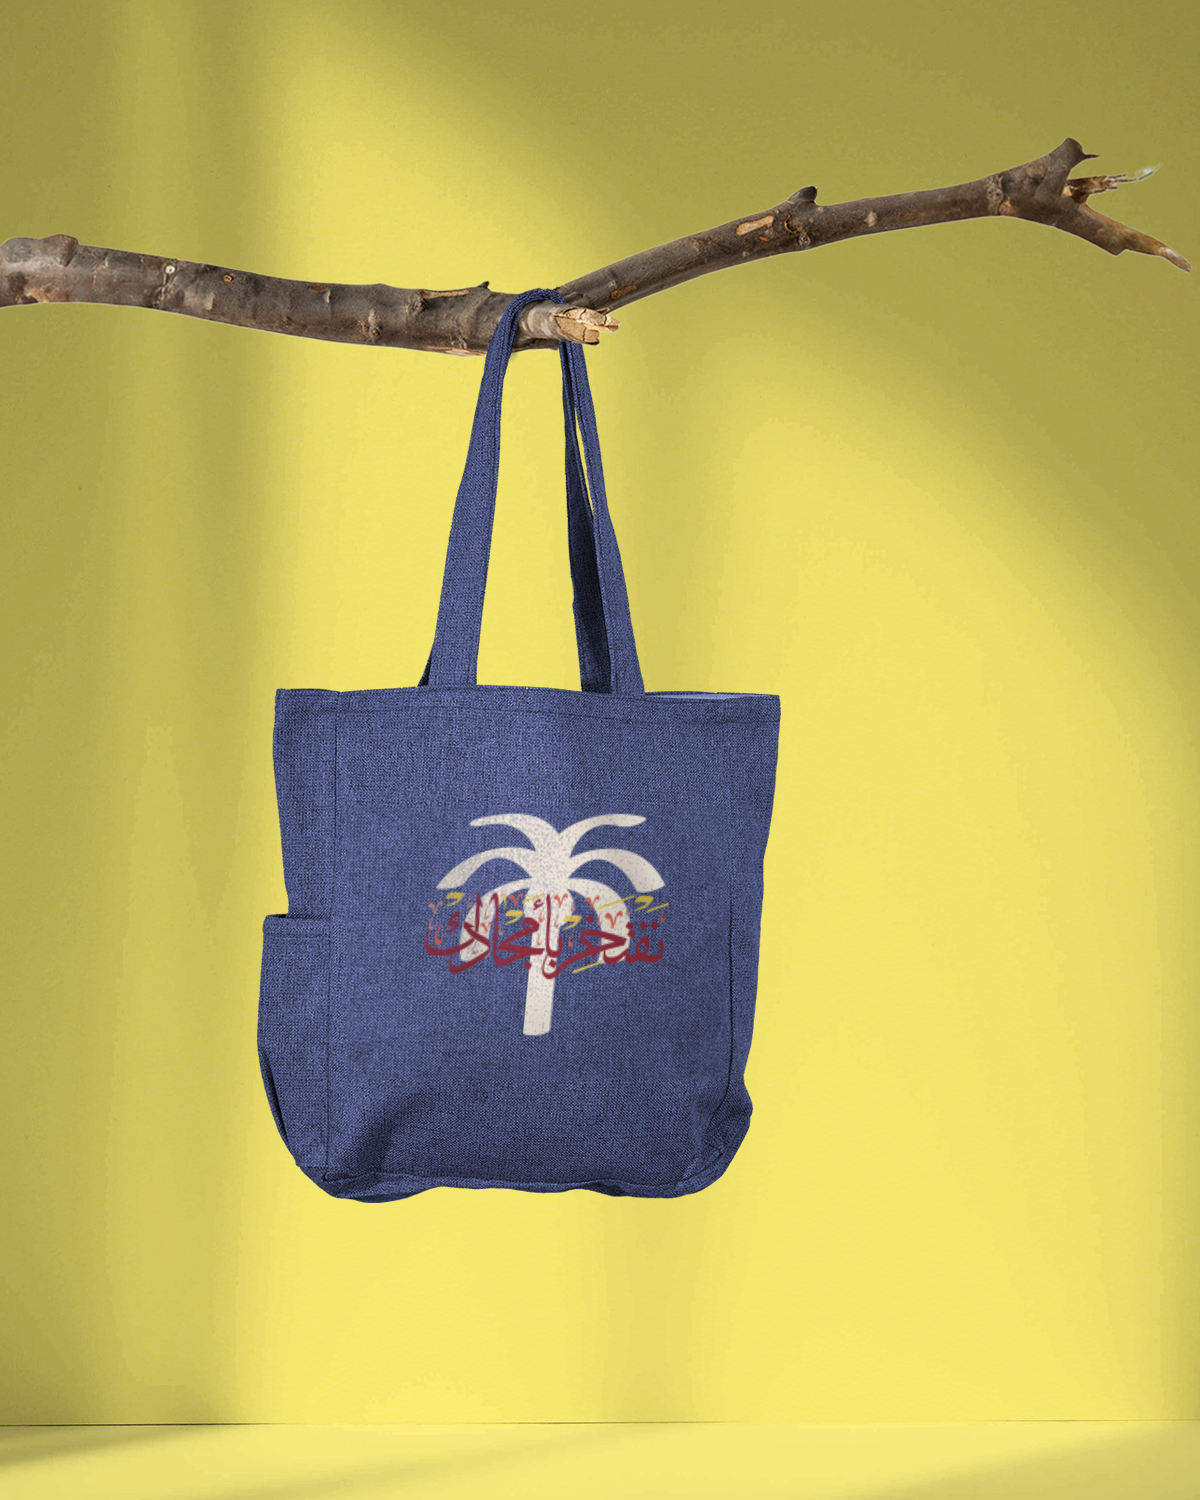 Foundation Day Tote Bag (We Take Pride in Your Glories)